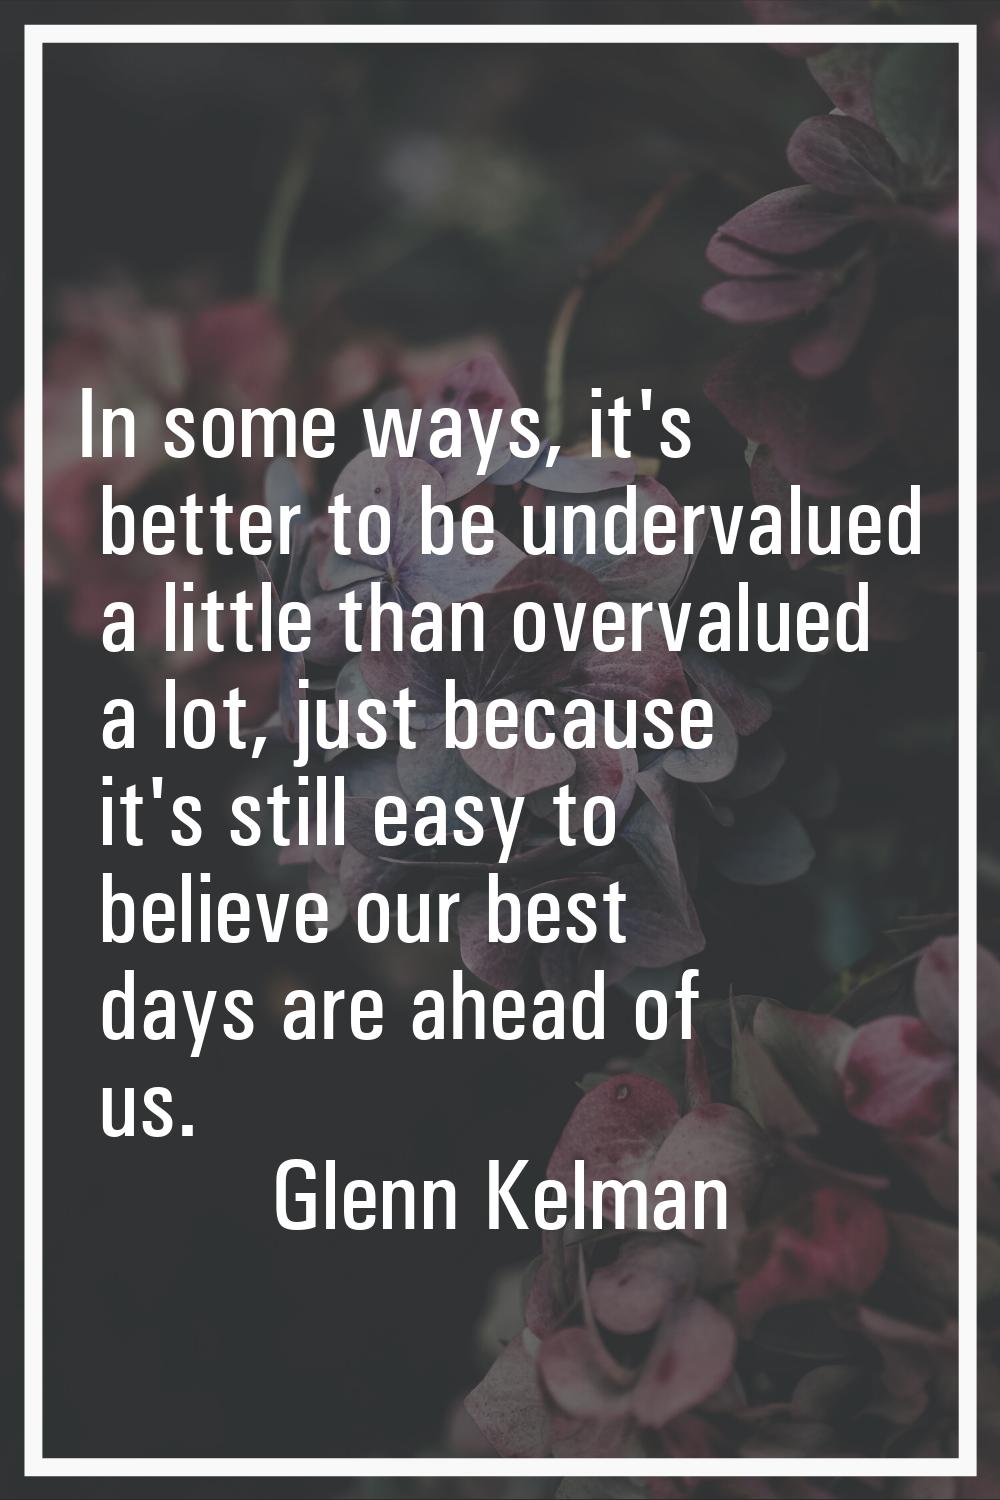 In some ways, it's better to be undervalued a little than overvalued a lot, just because it's still